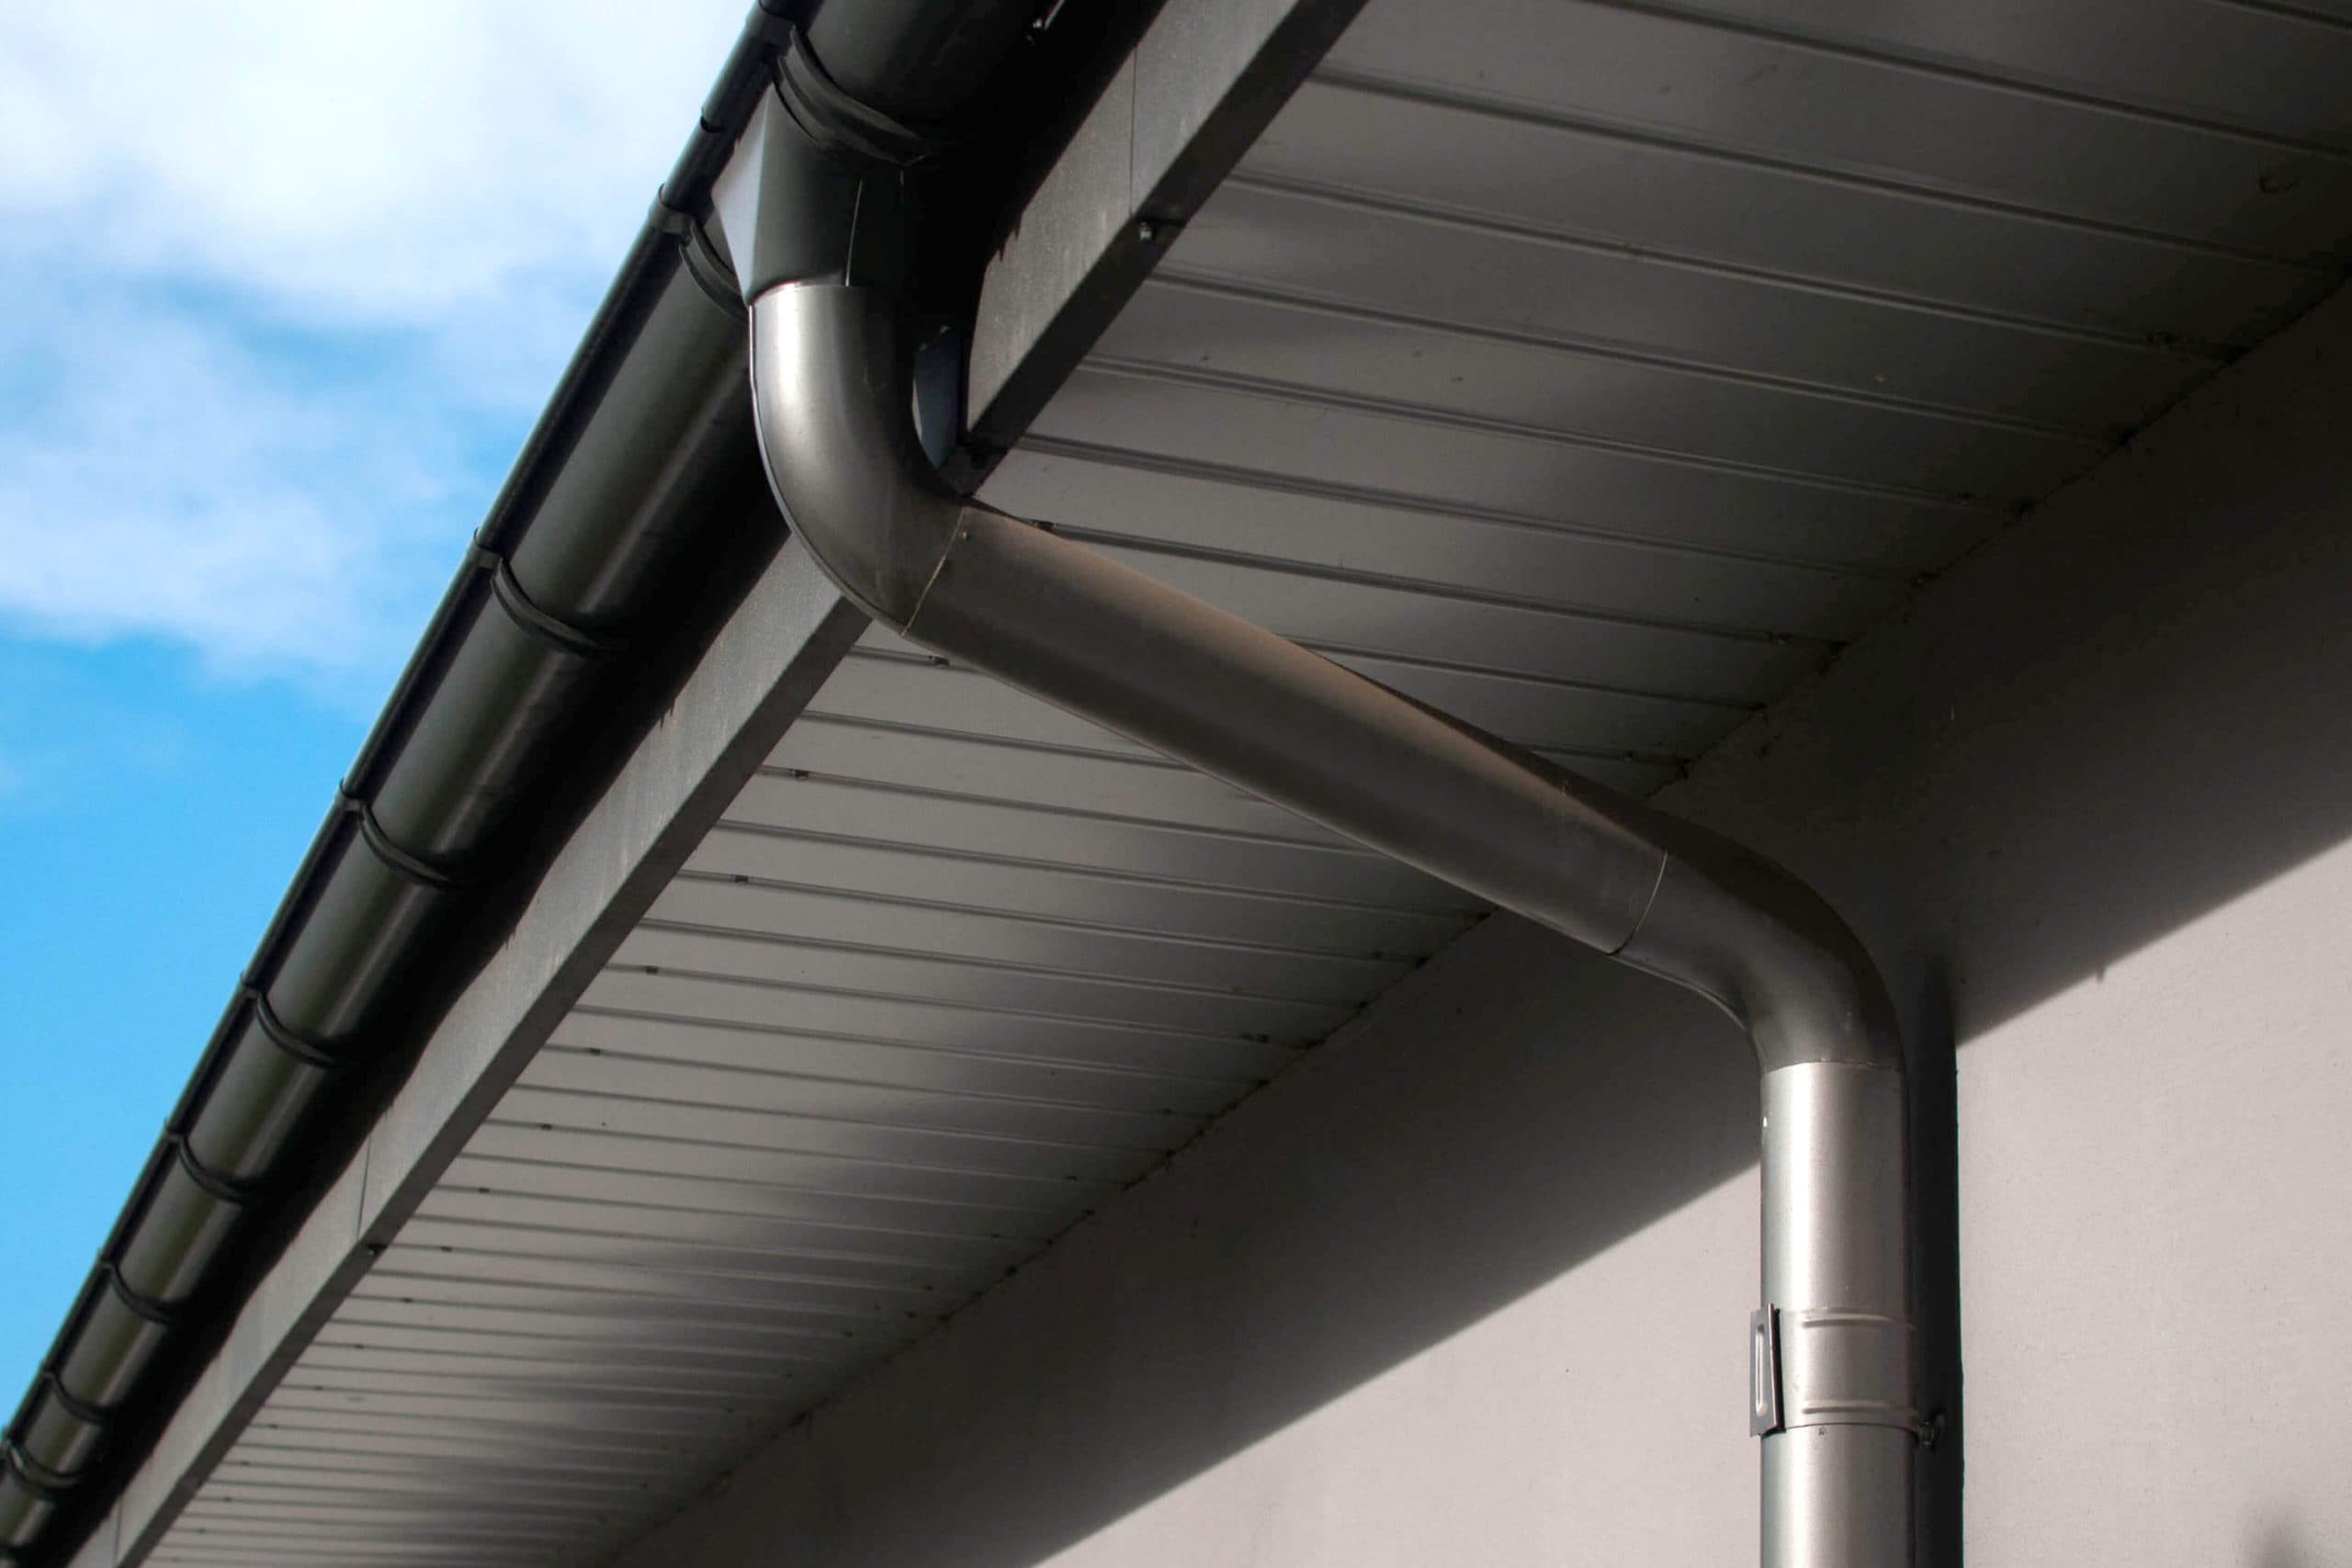 Corrosion-resistant galvanized gutters installed on a commercial building in Stafford